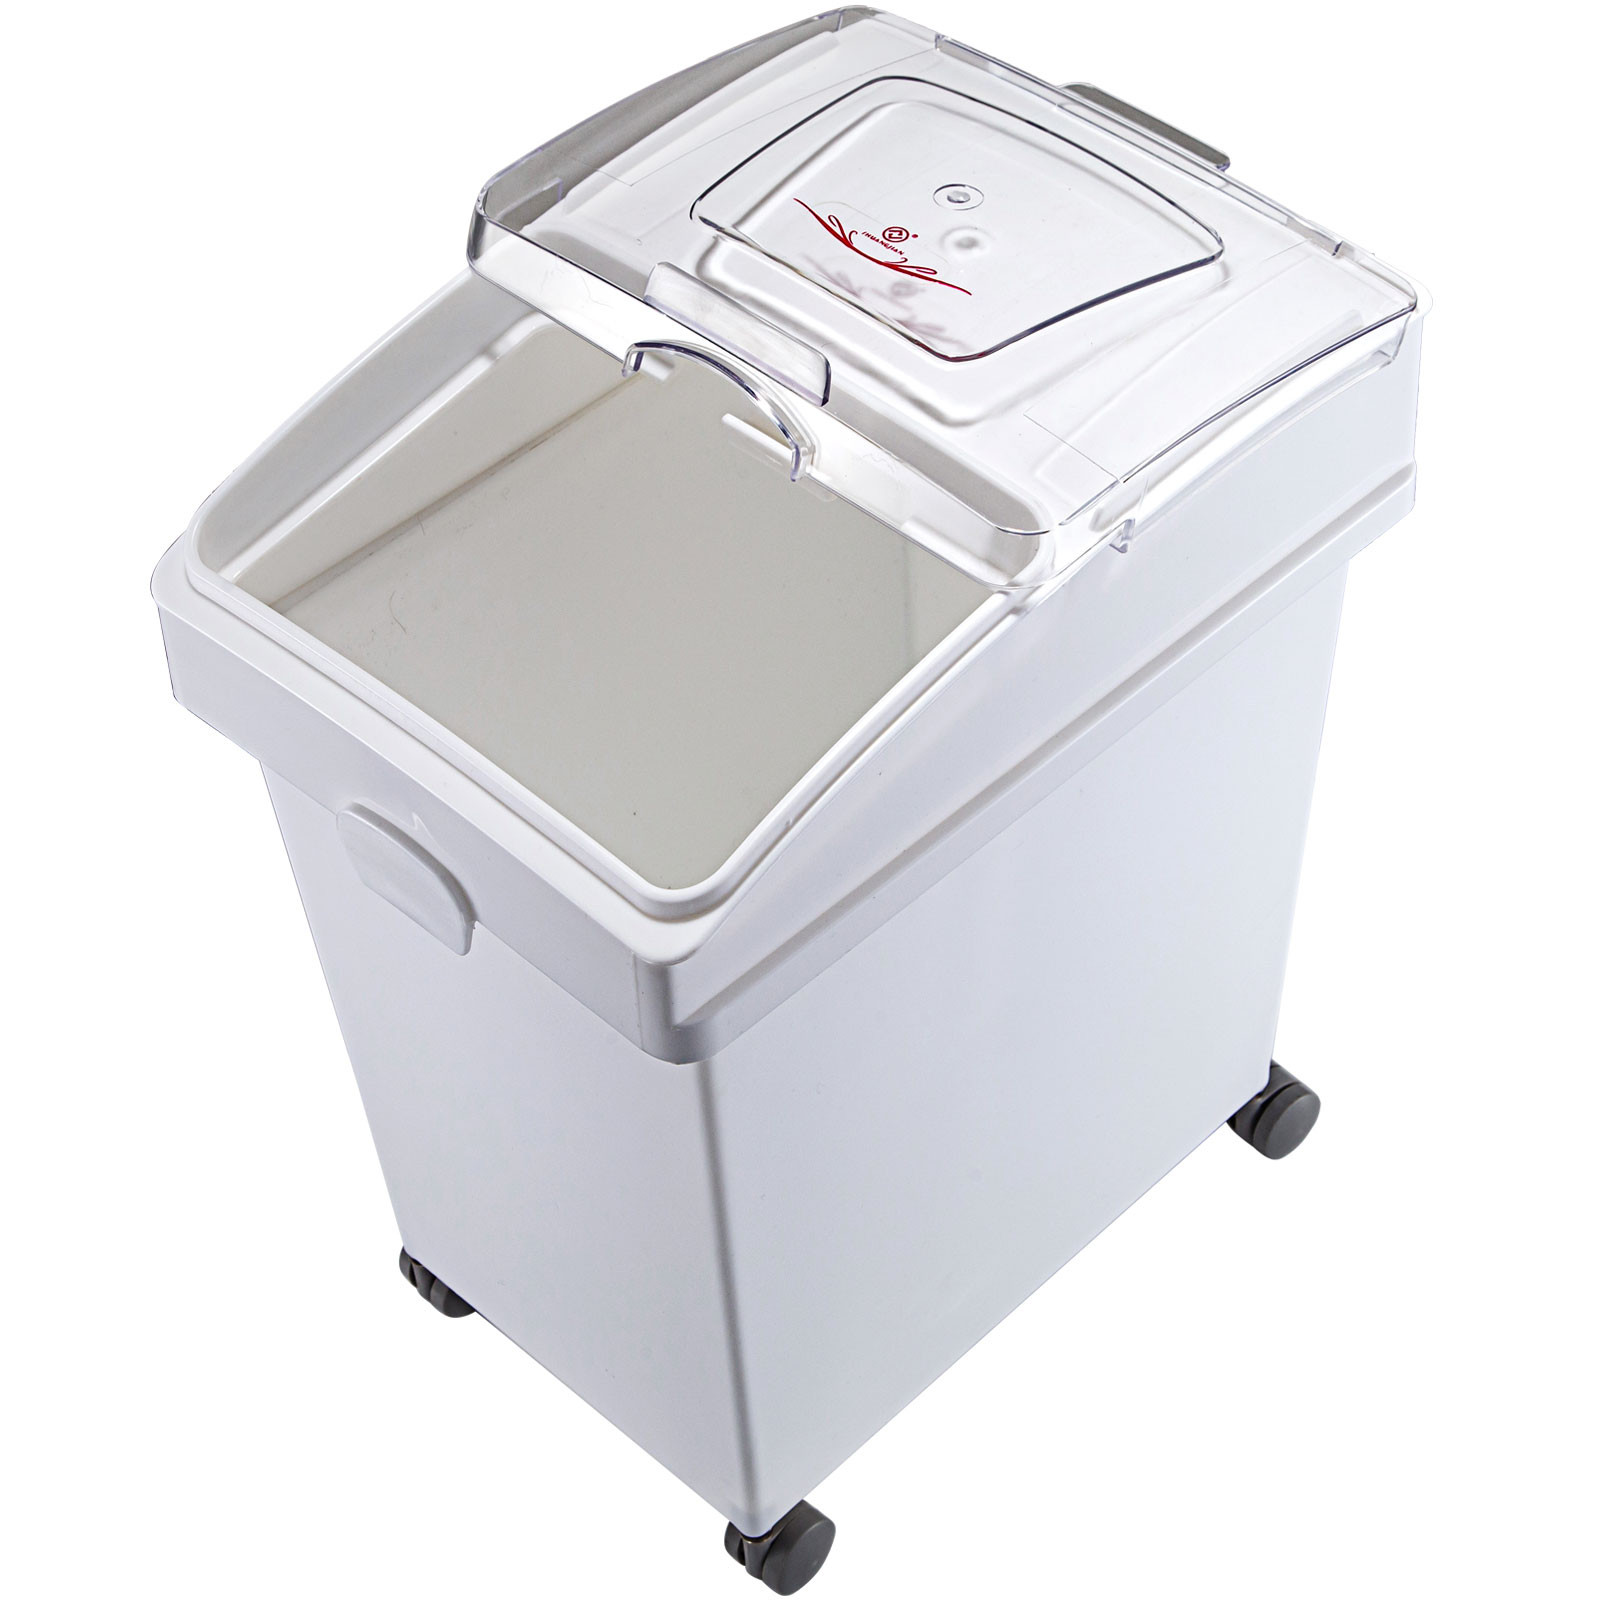 Details about   2 Pack Ingredient Bin with Casters 10.5 Gal Mobile Restaurant Kitchen Flour Bins